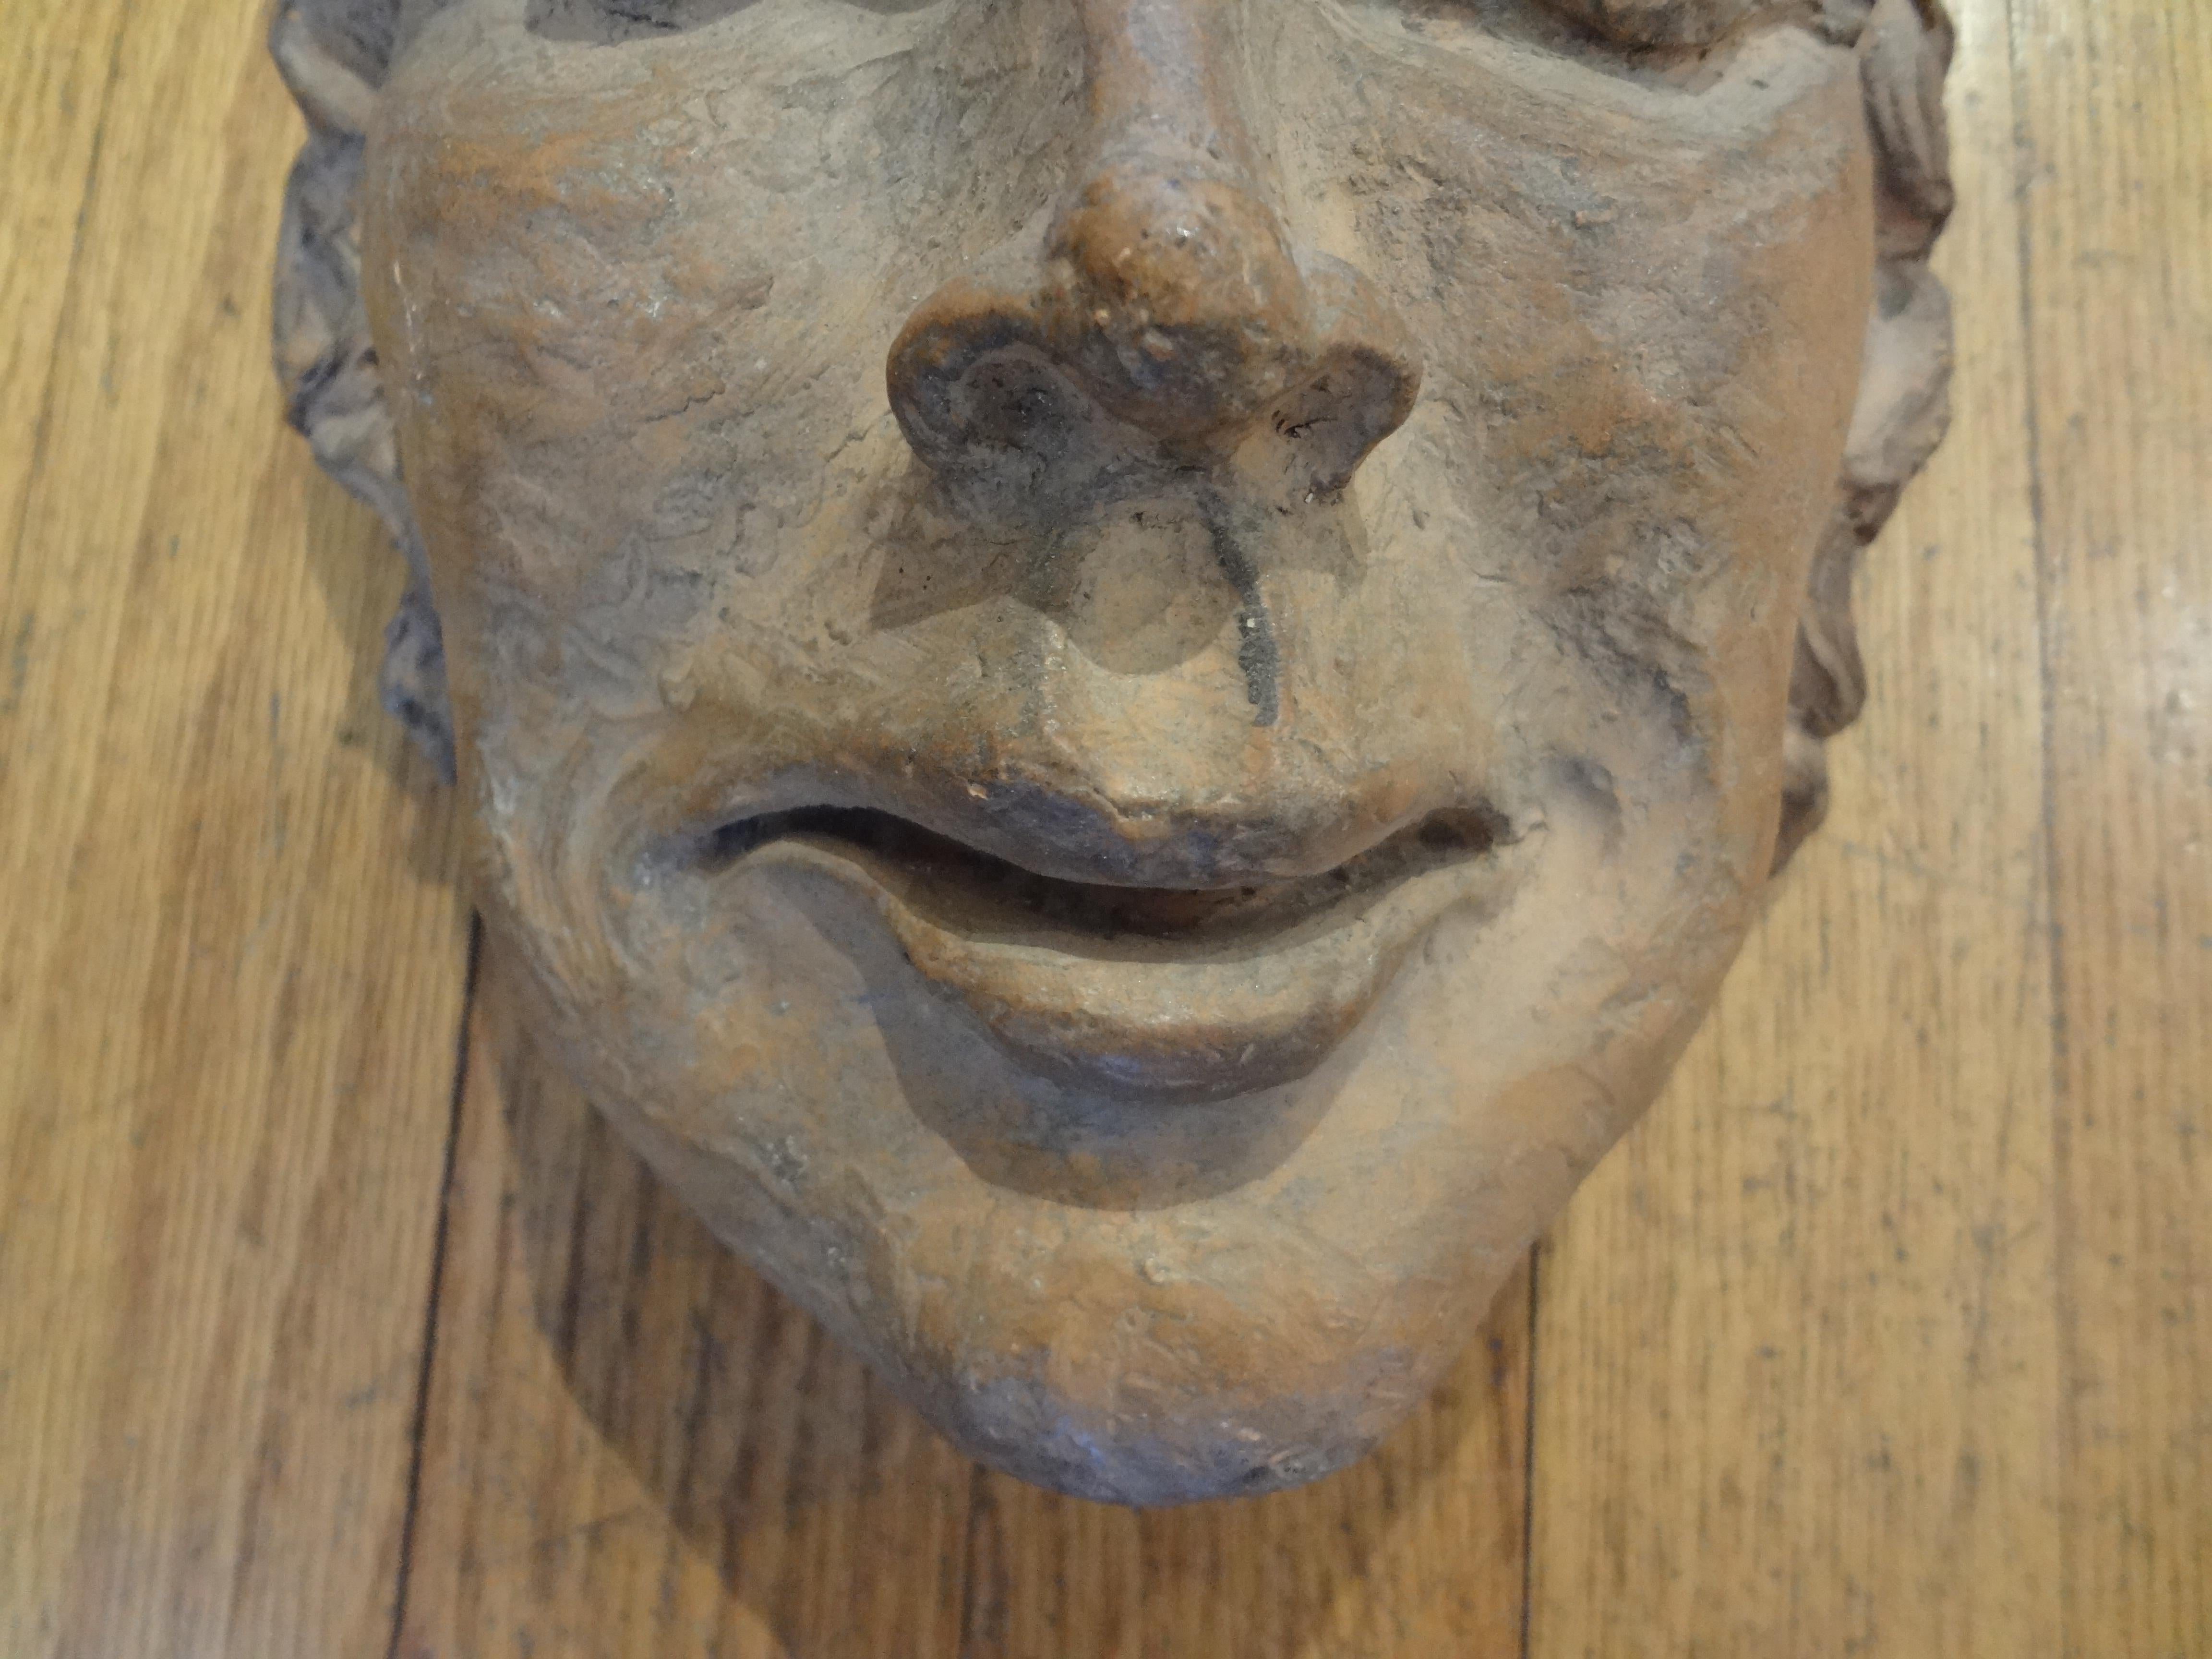 Mid-20th Century French Art Deco Terracotta Face Mask Sculpture For Sale